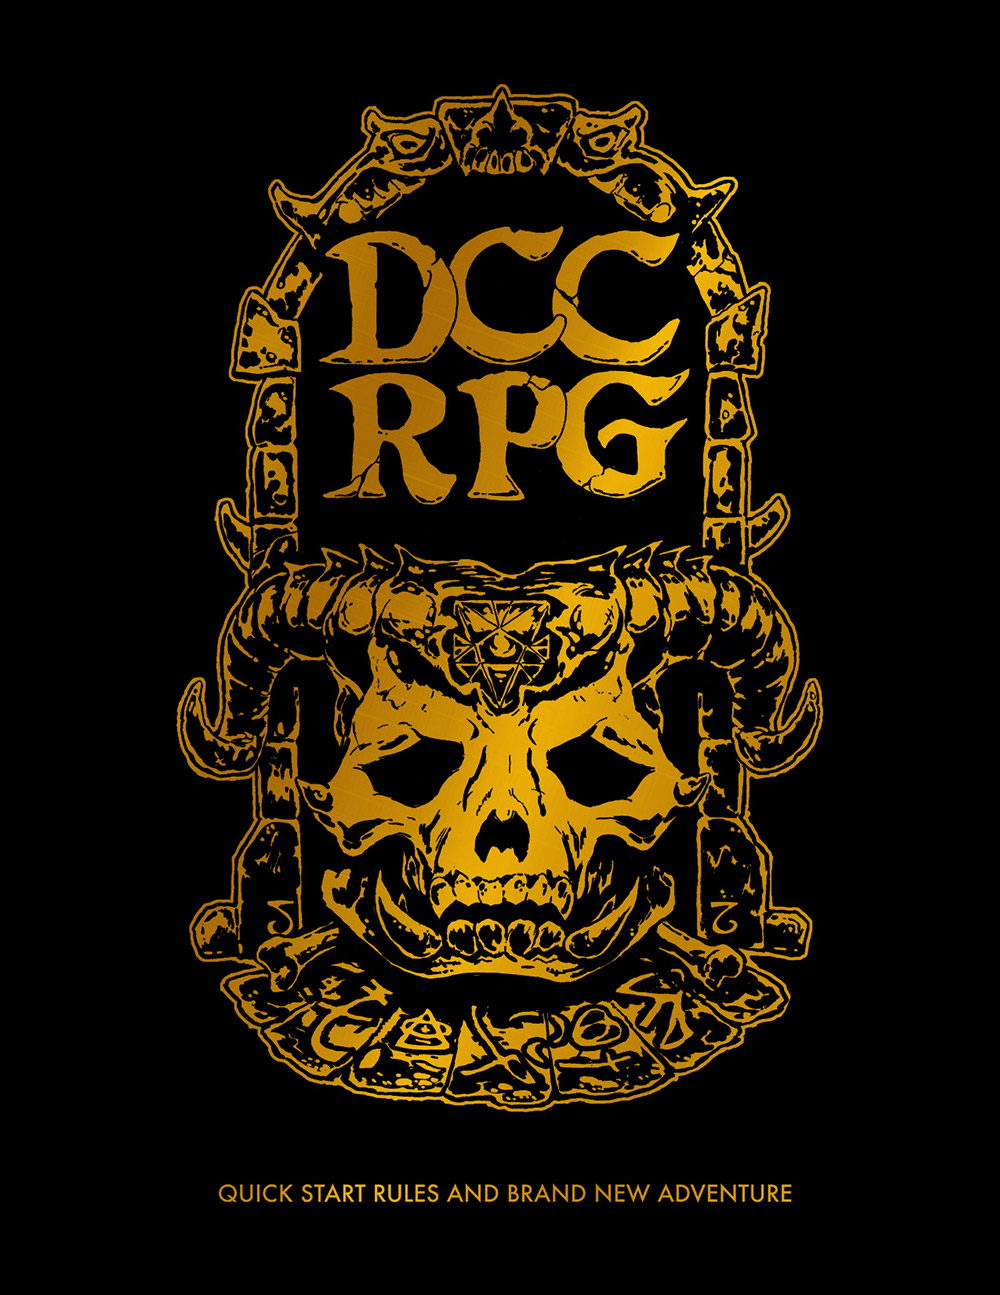 Details about   DCC Day 2020 Dungeon Crawl Classics NEW Quick Start Rules&Adventure D&D rpg 